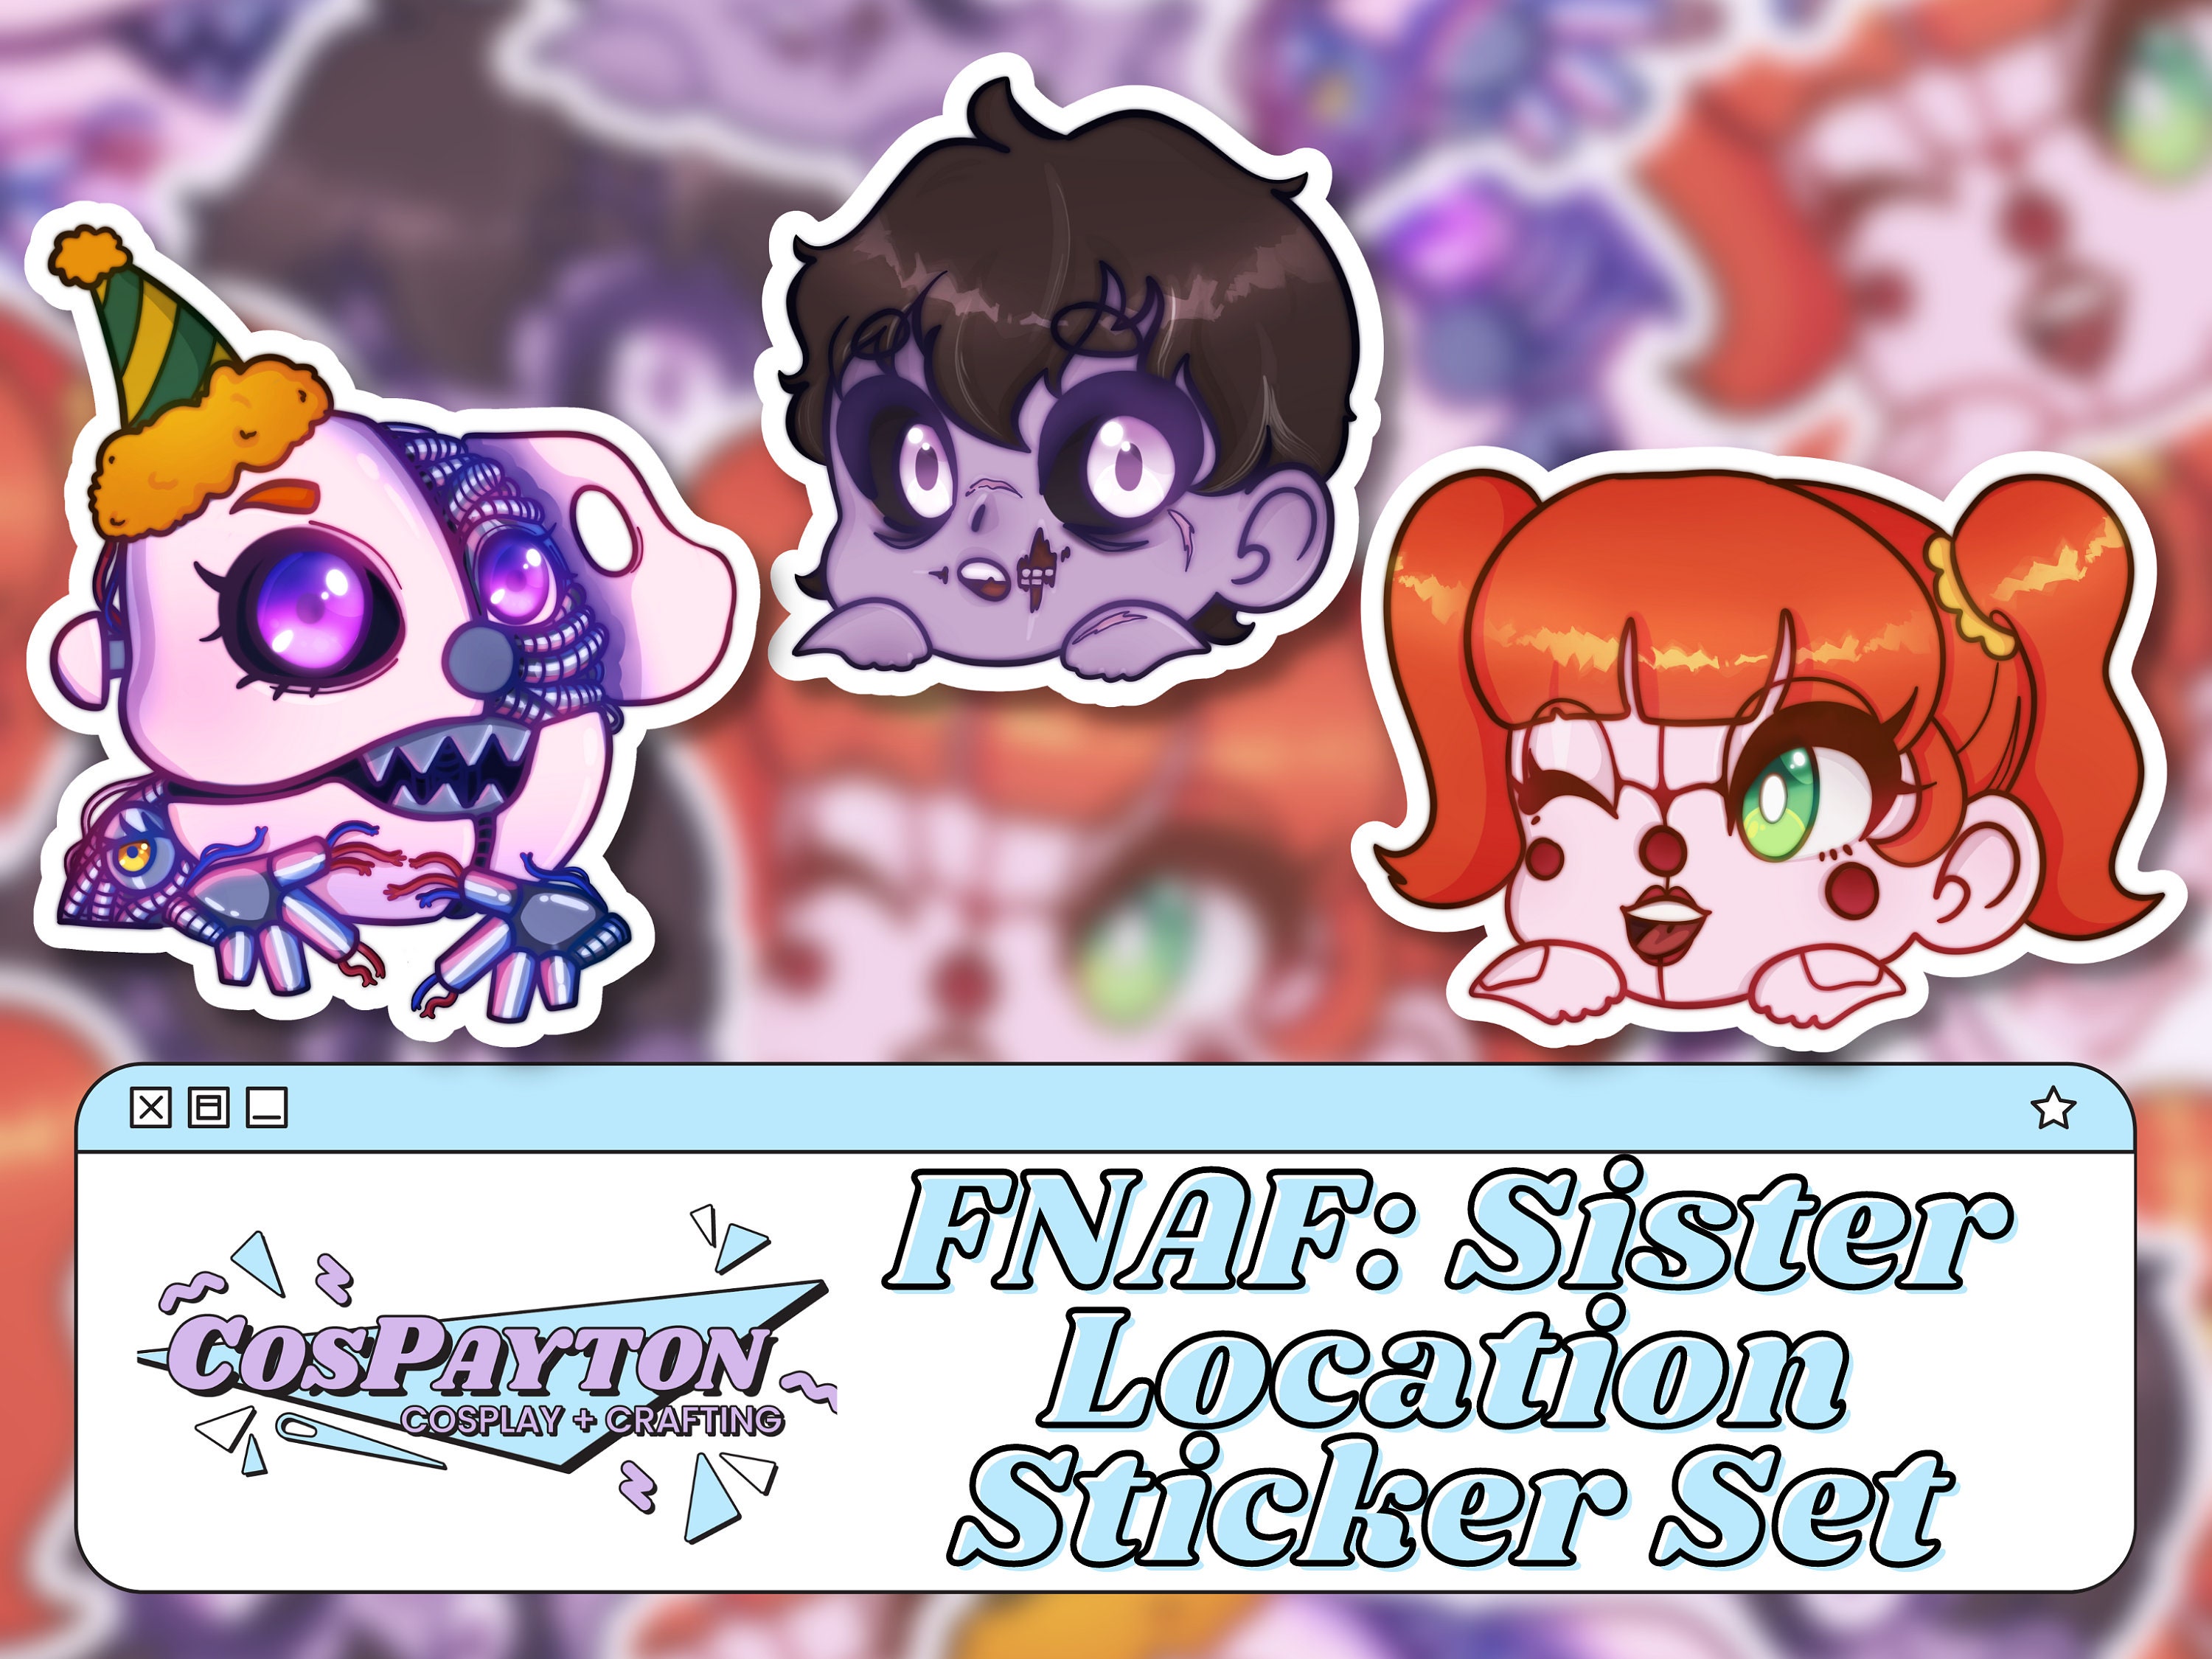 Cute Five Nights at Freddy's Stickers 4 Pack Stinkostudio 